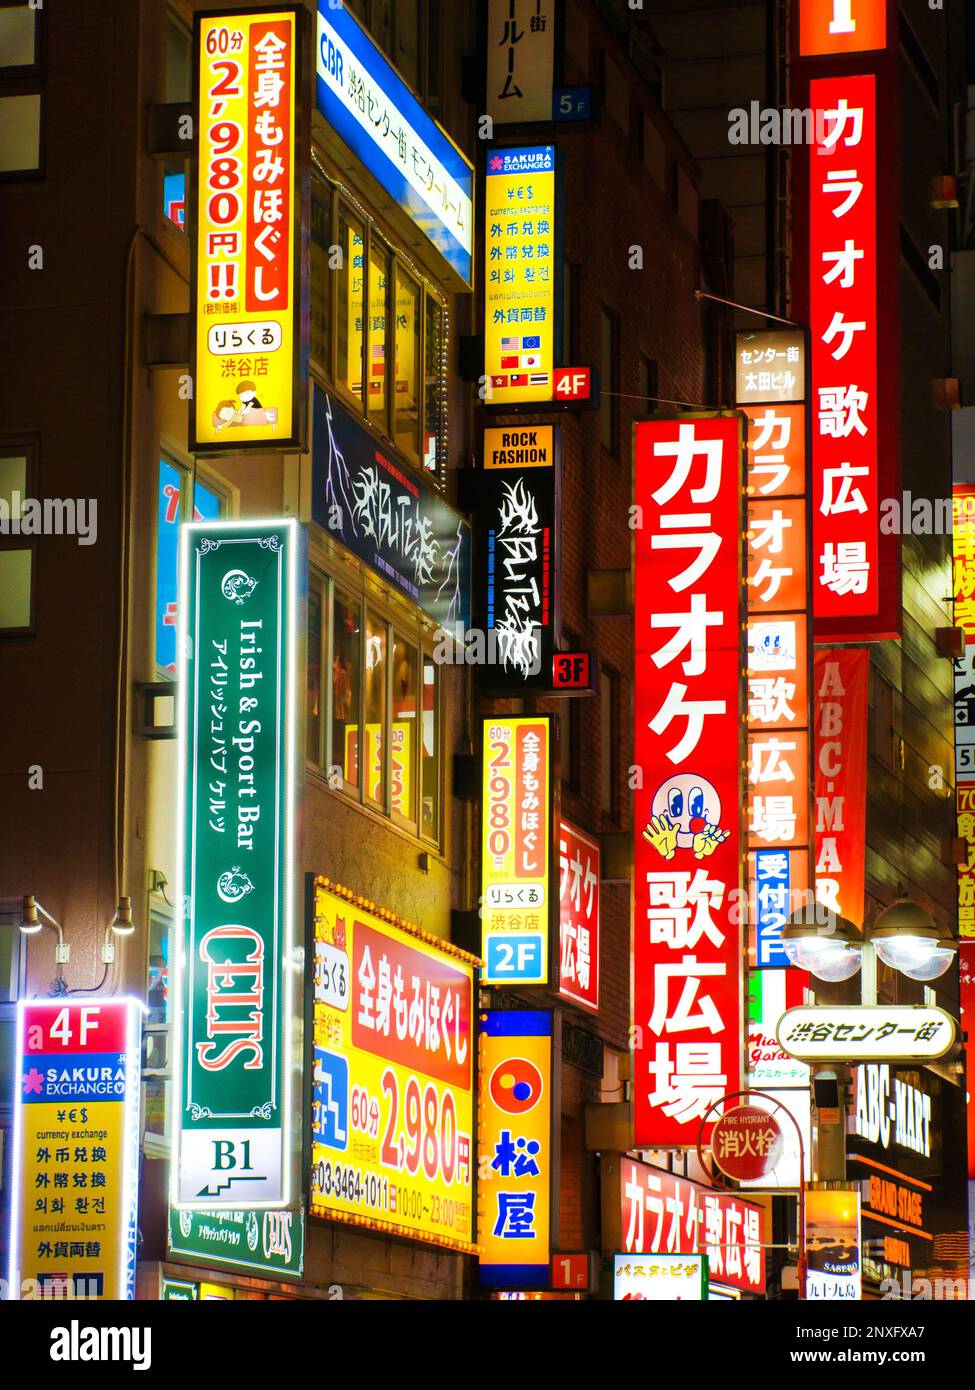 Tokyo neon lights, billboards and colorful signs in Shibuya Center Street Stock Photo